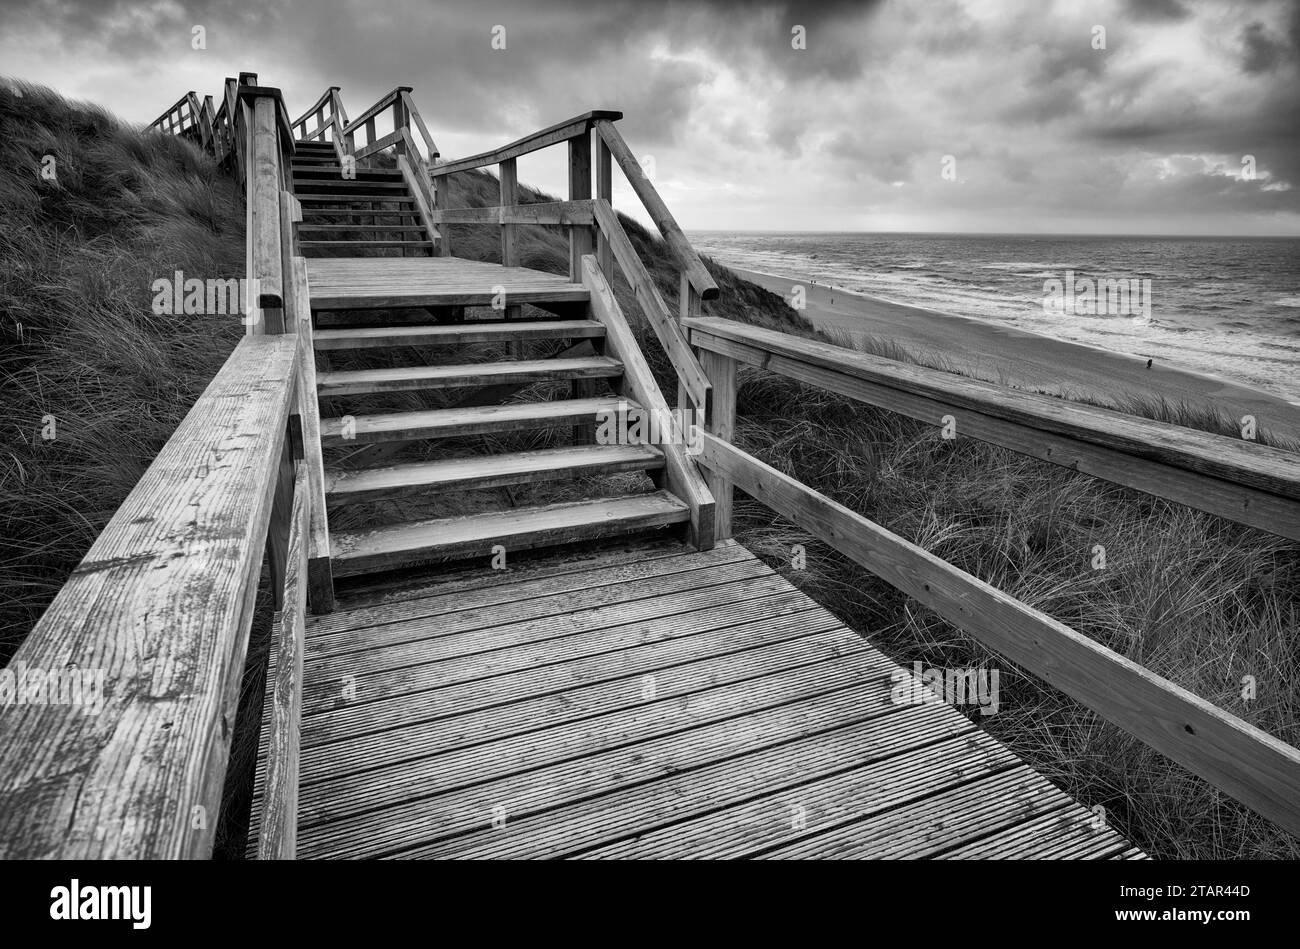 Boardwalk, wooden walkway, dune hiking trail, black and white photo, Wenningstedt, Braderup, North Sea island of Sylt, North Frisia Stock Photo